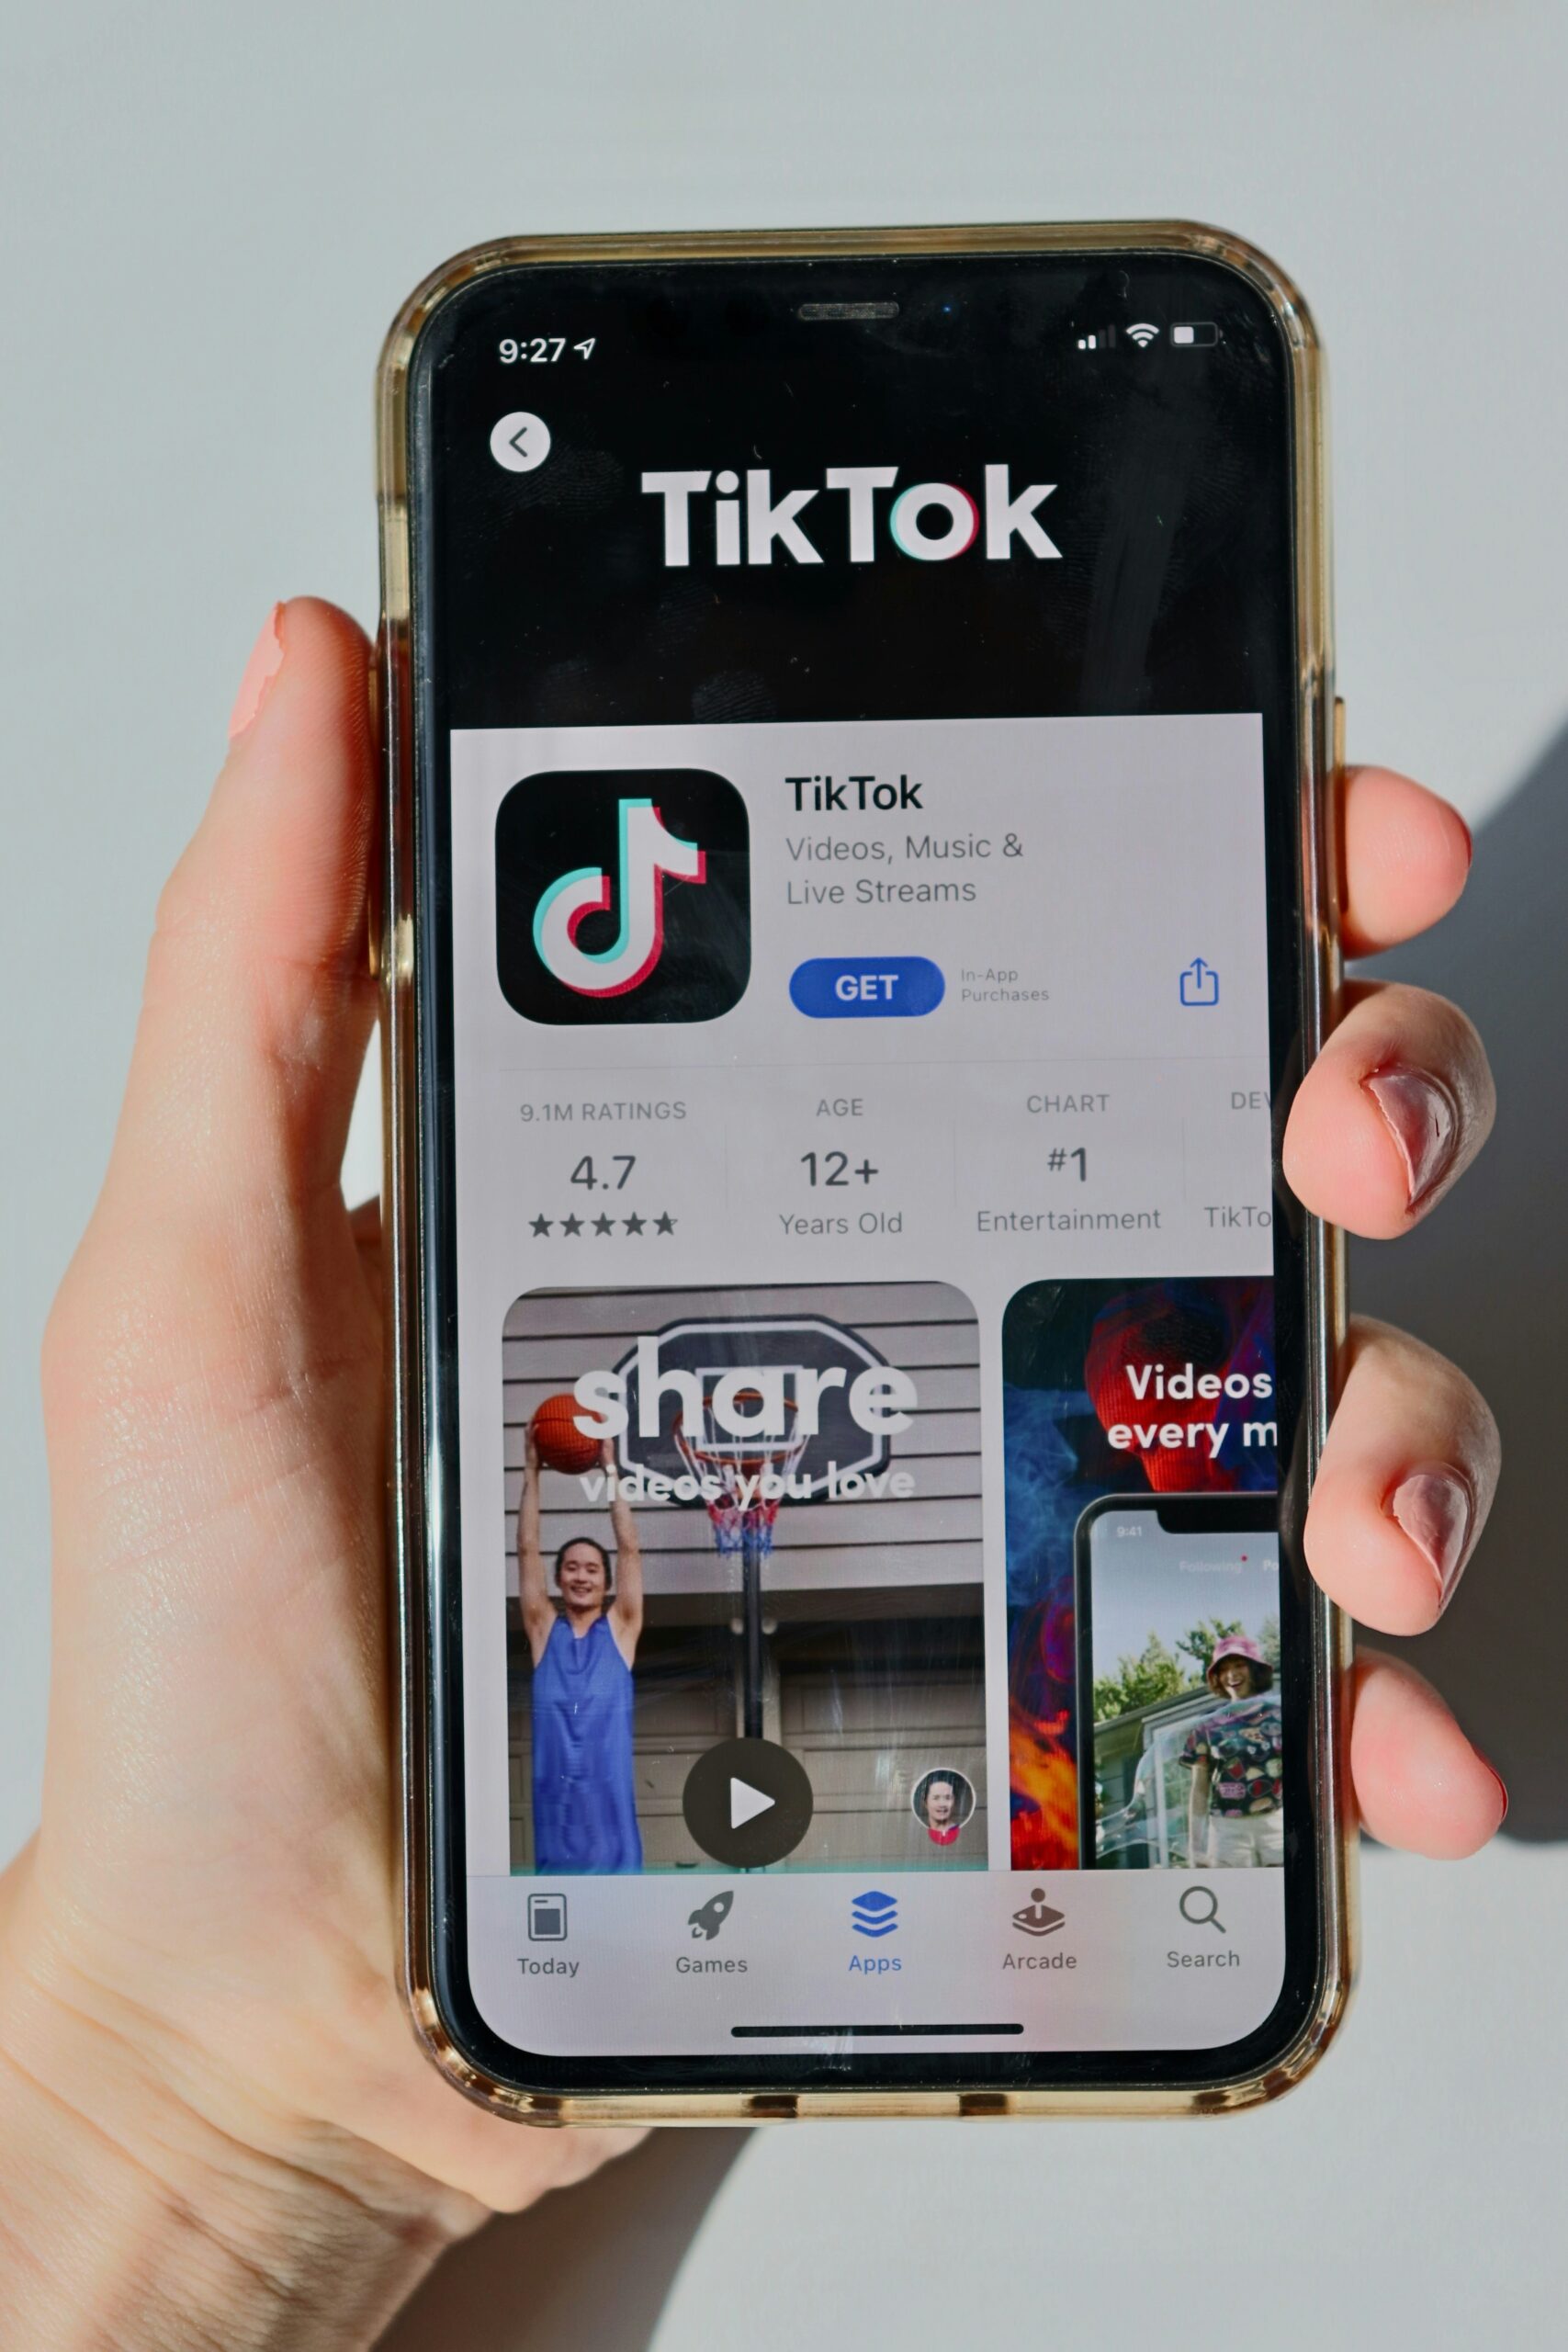 James Donaldson on Mental Health – Did TikTok videos inspire a teen’s suicide? His mom says she found graphic evidence